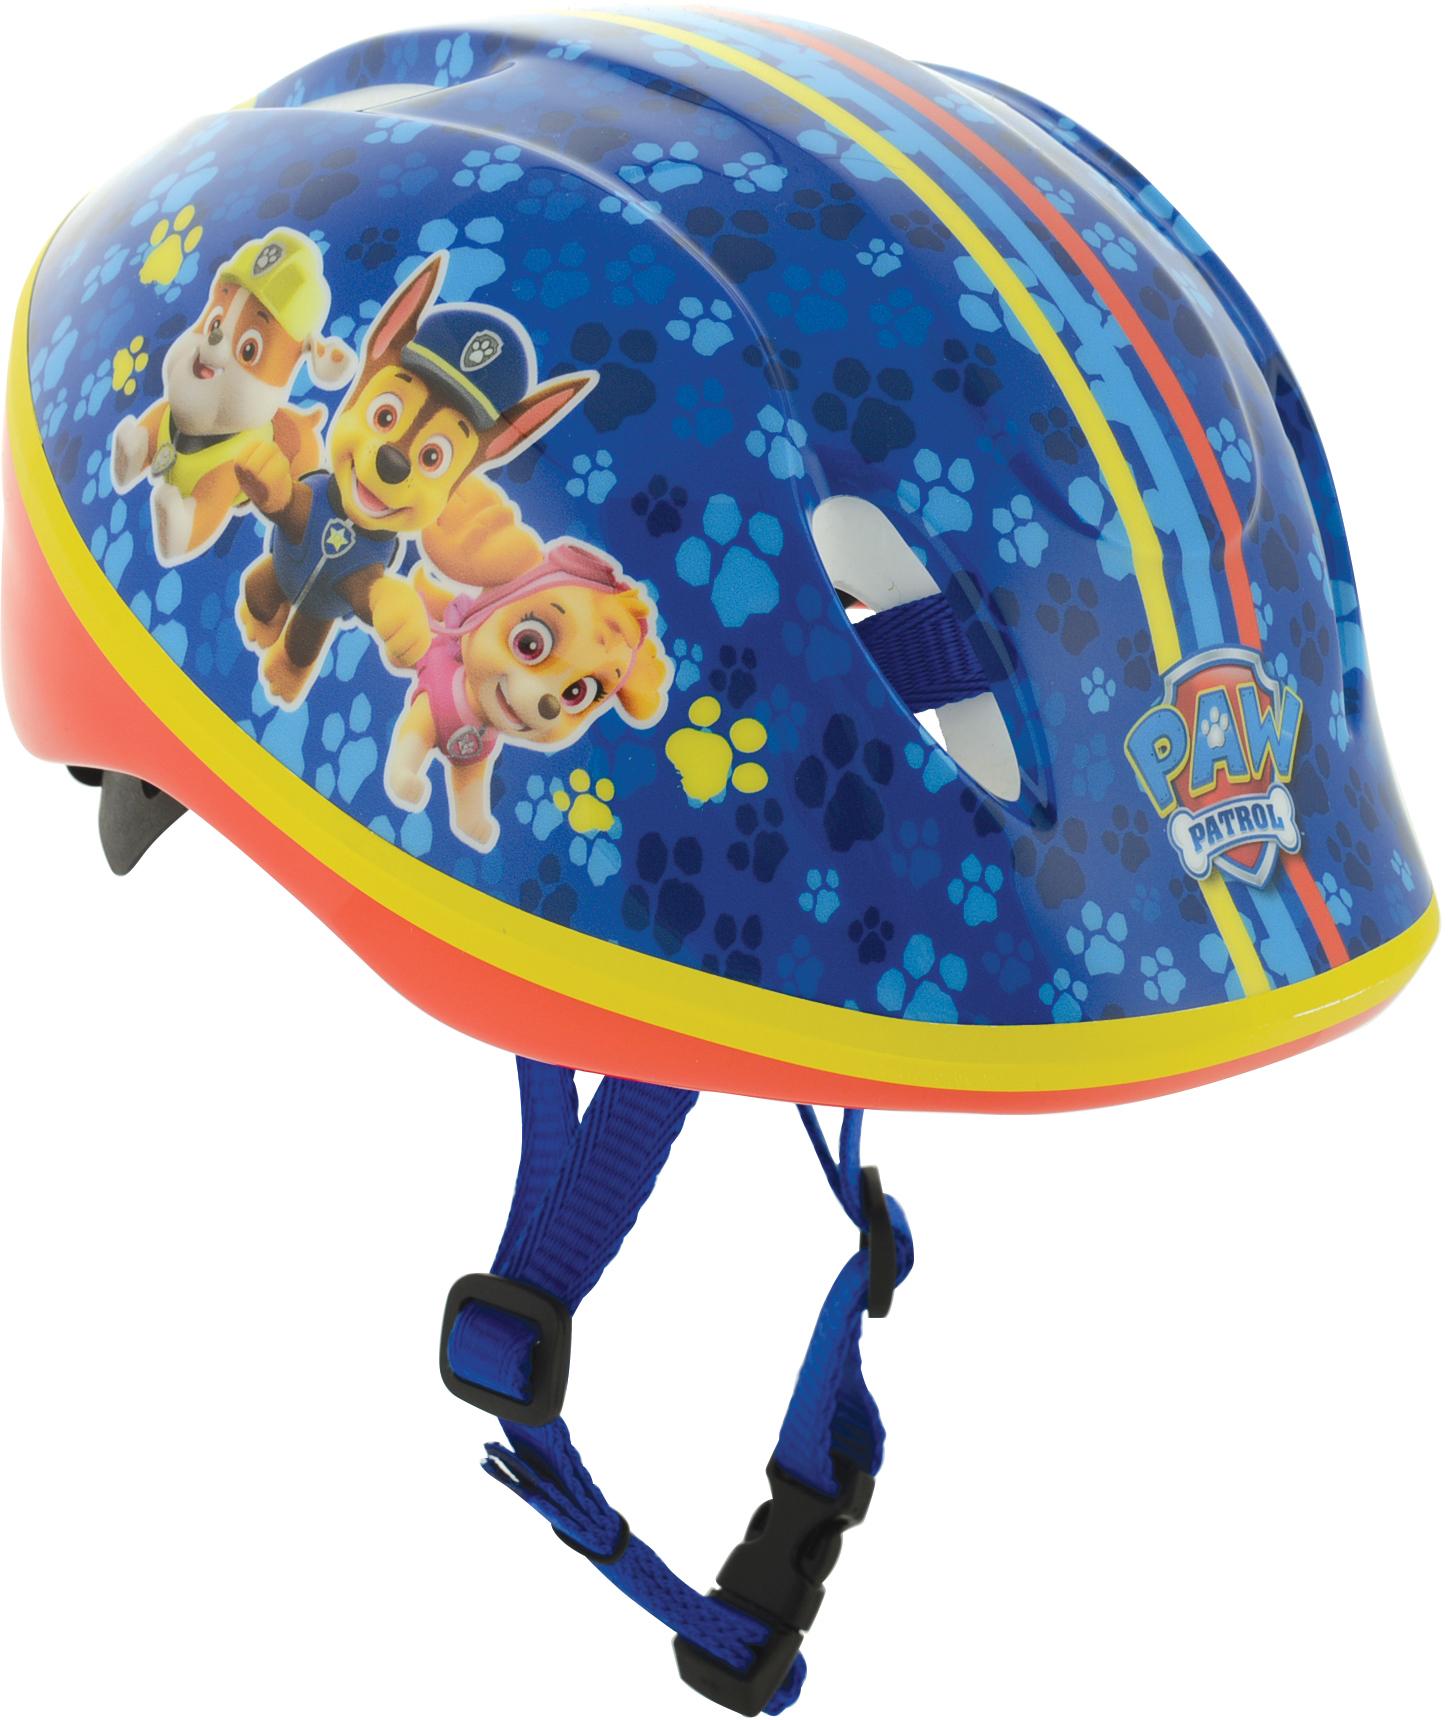 48-52cm Kids Safety Bicycling New Details about   Paw Patrol Chase Multisport Helmet Toddler 3 